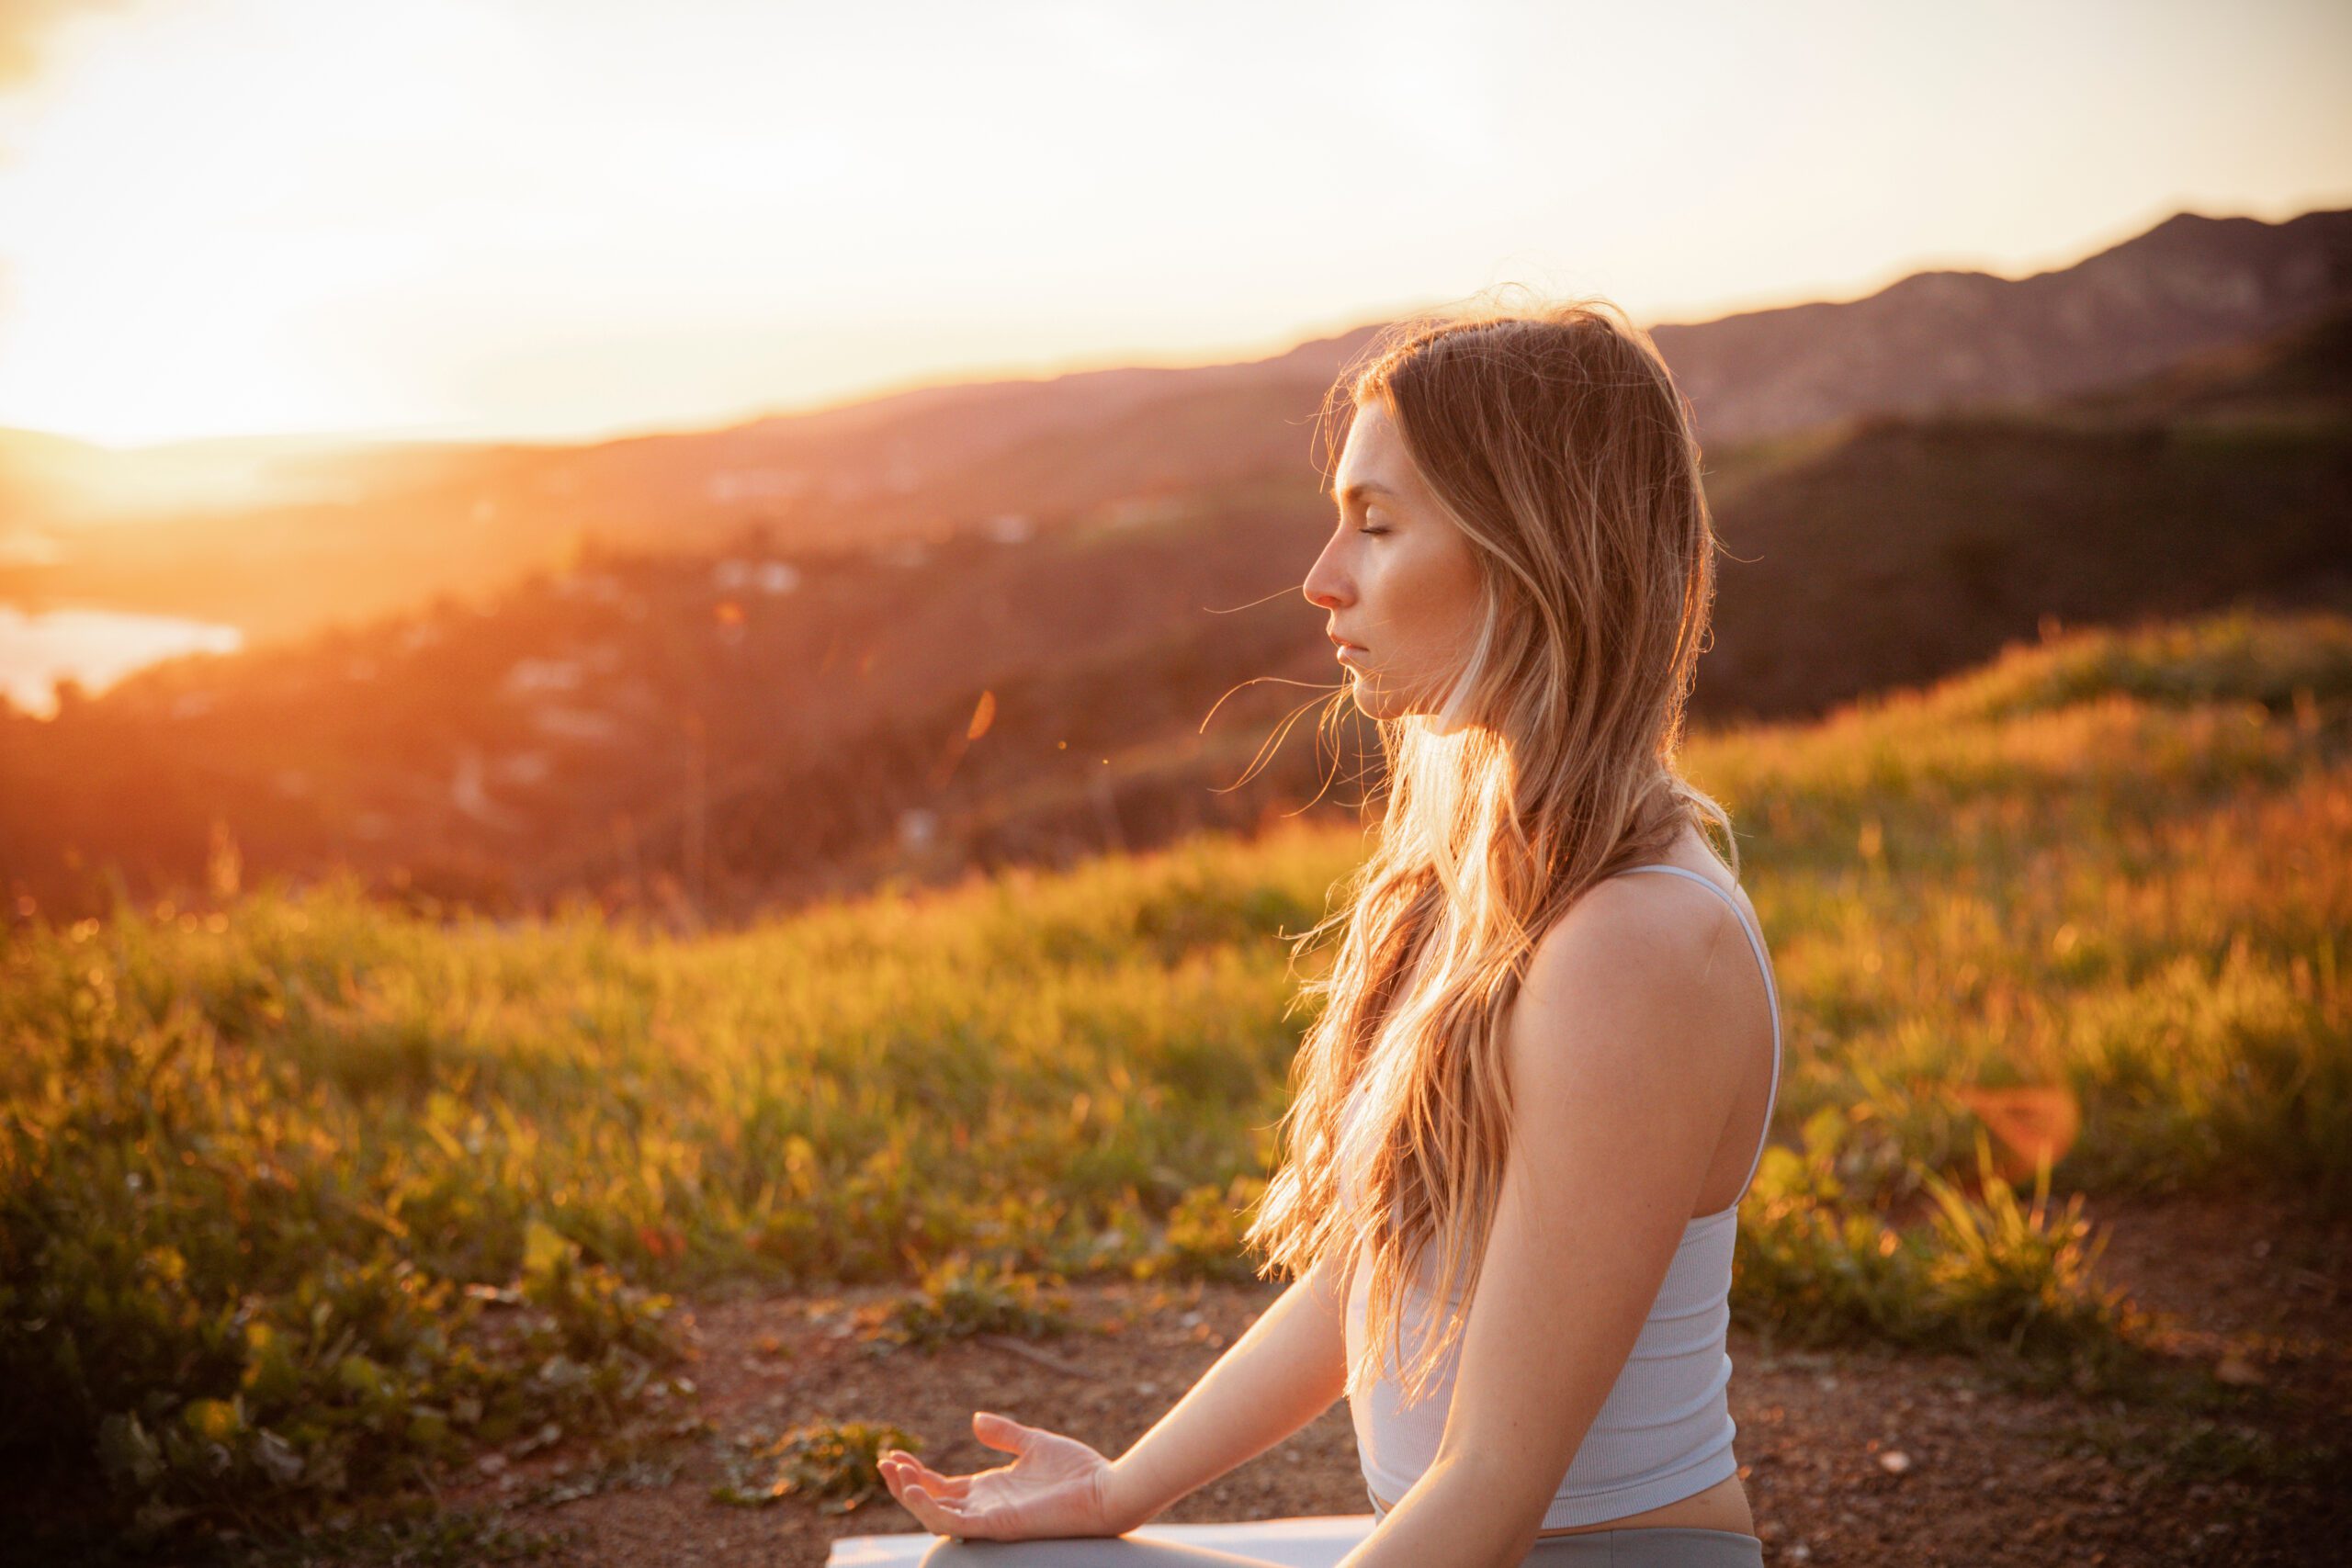 Meditation Styles to Support Your Recovery, meditation in addiction recovery